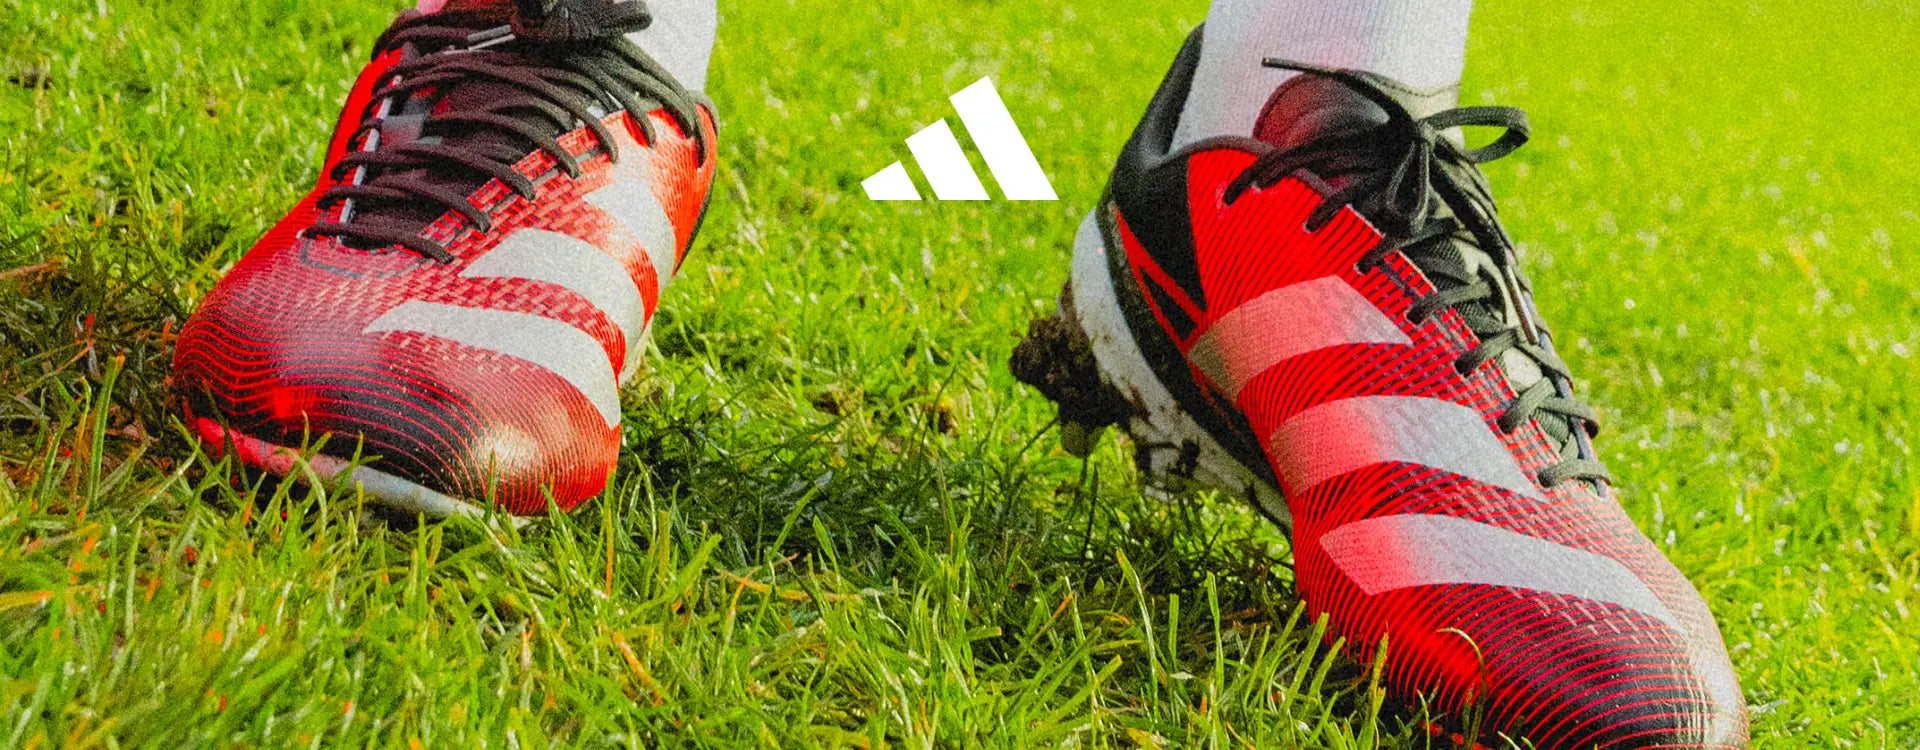 Adidas Rugby Boots - Solar Red Pack